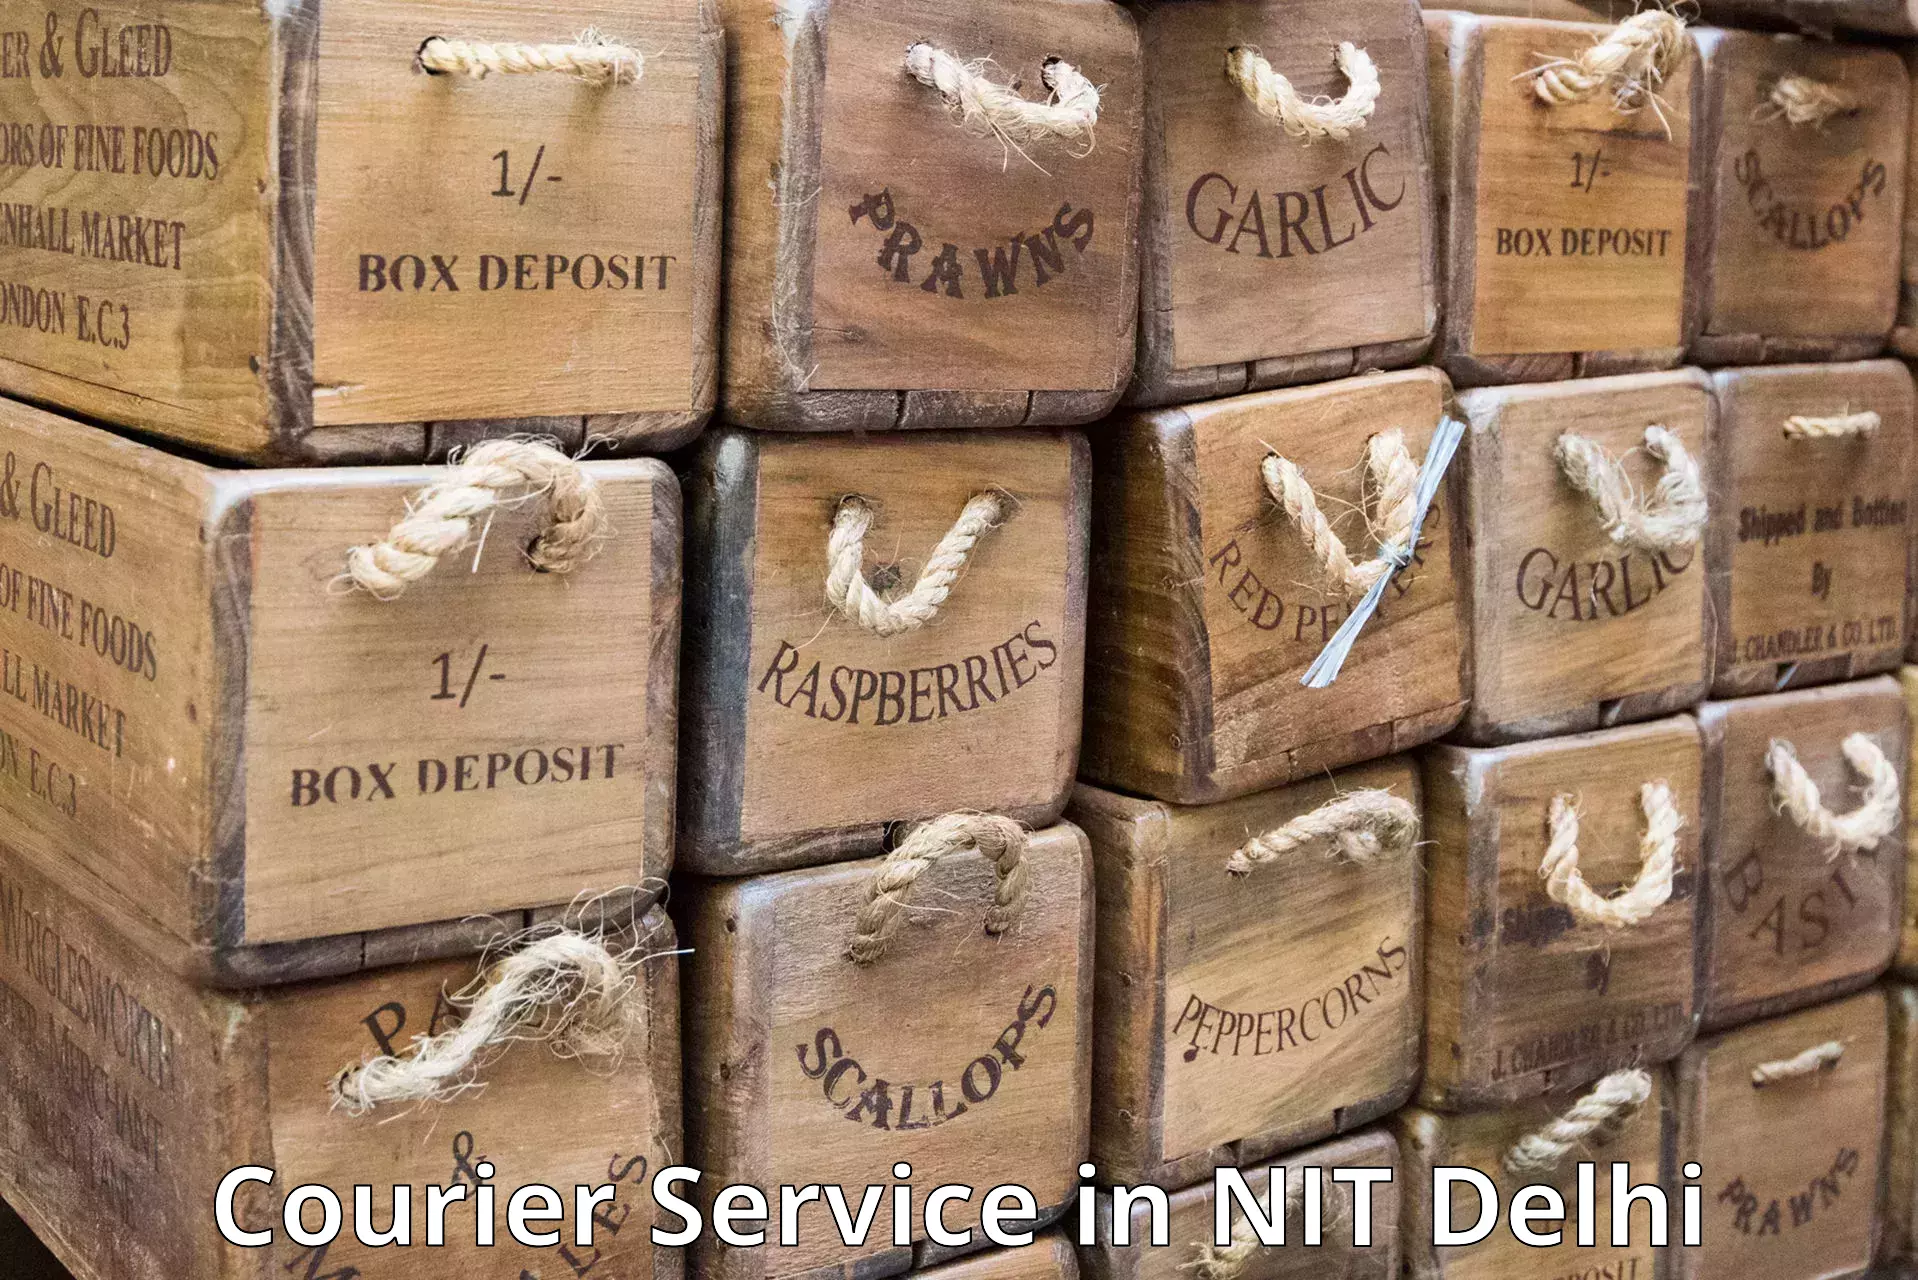 Nationwide delivery network in NIT Delhi